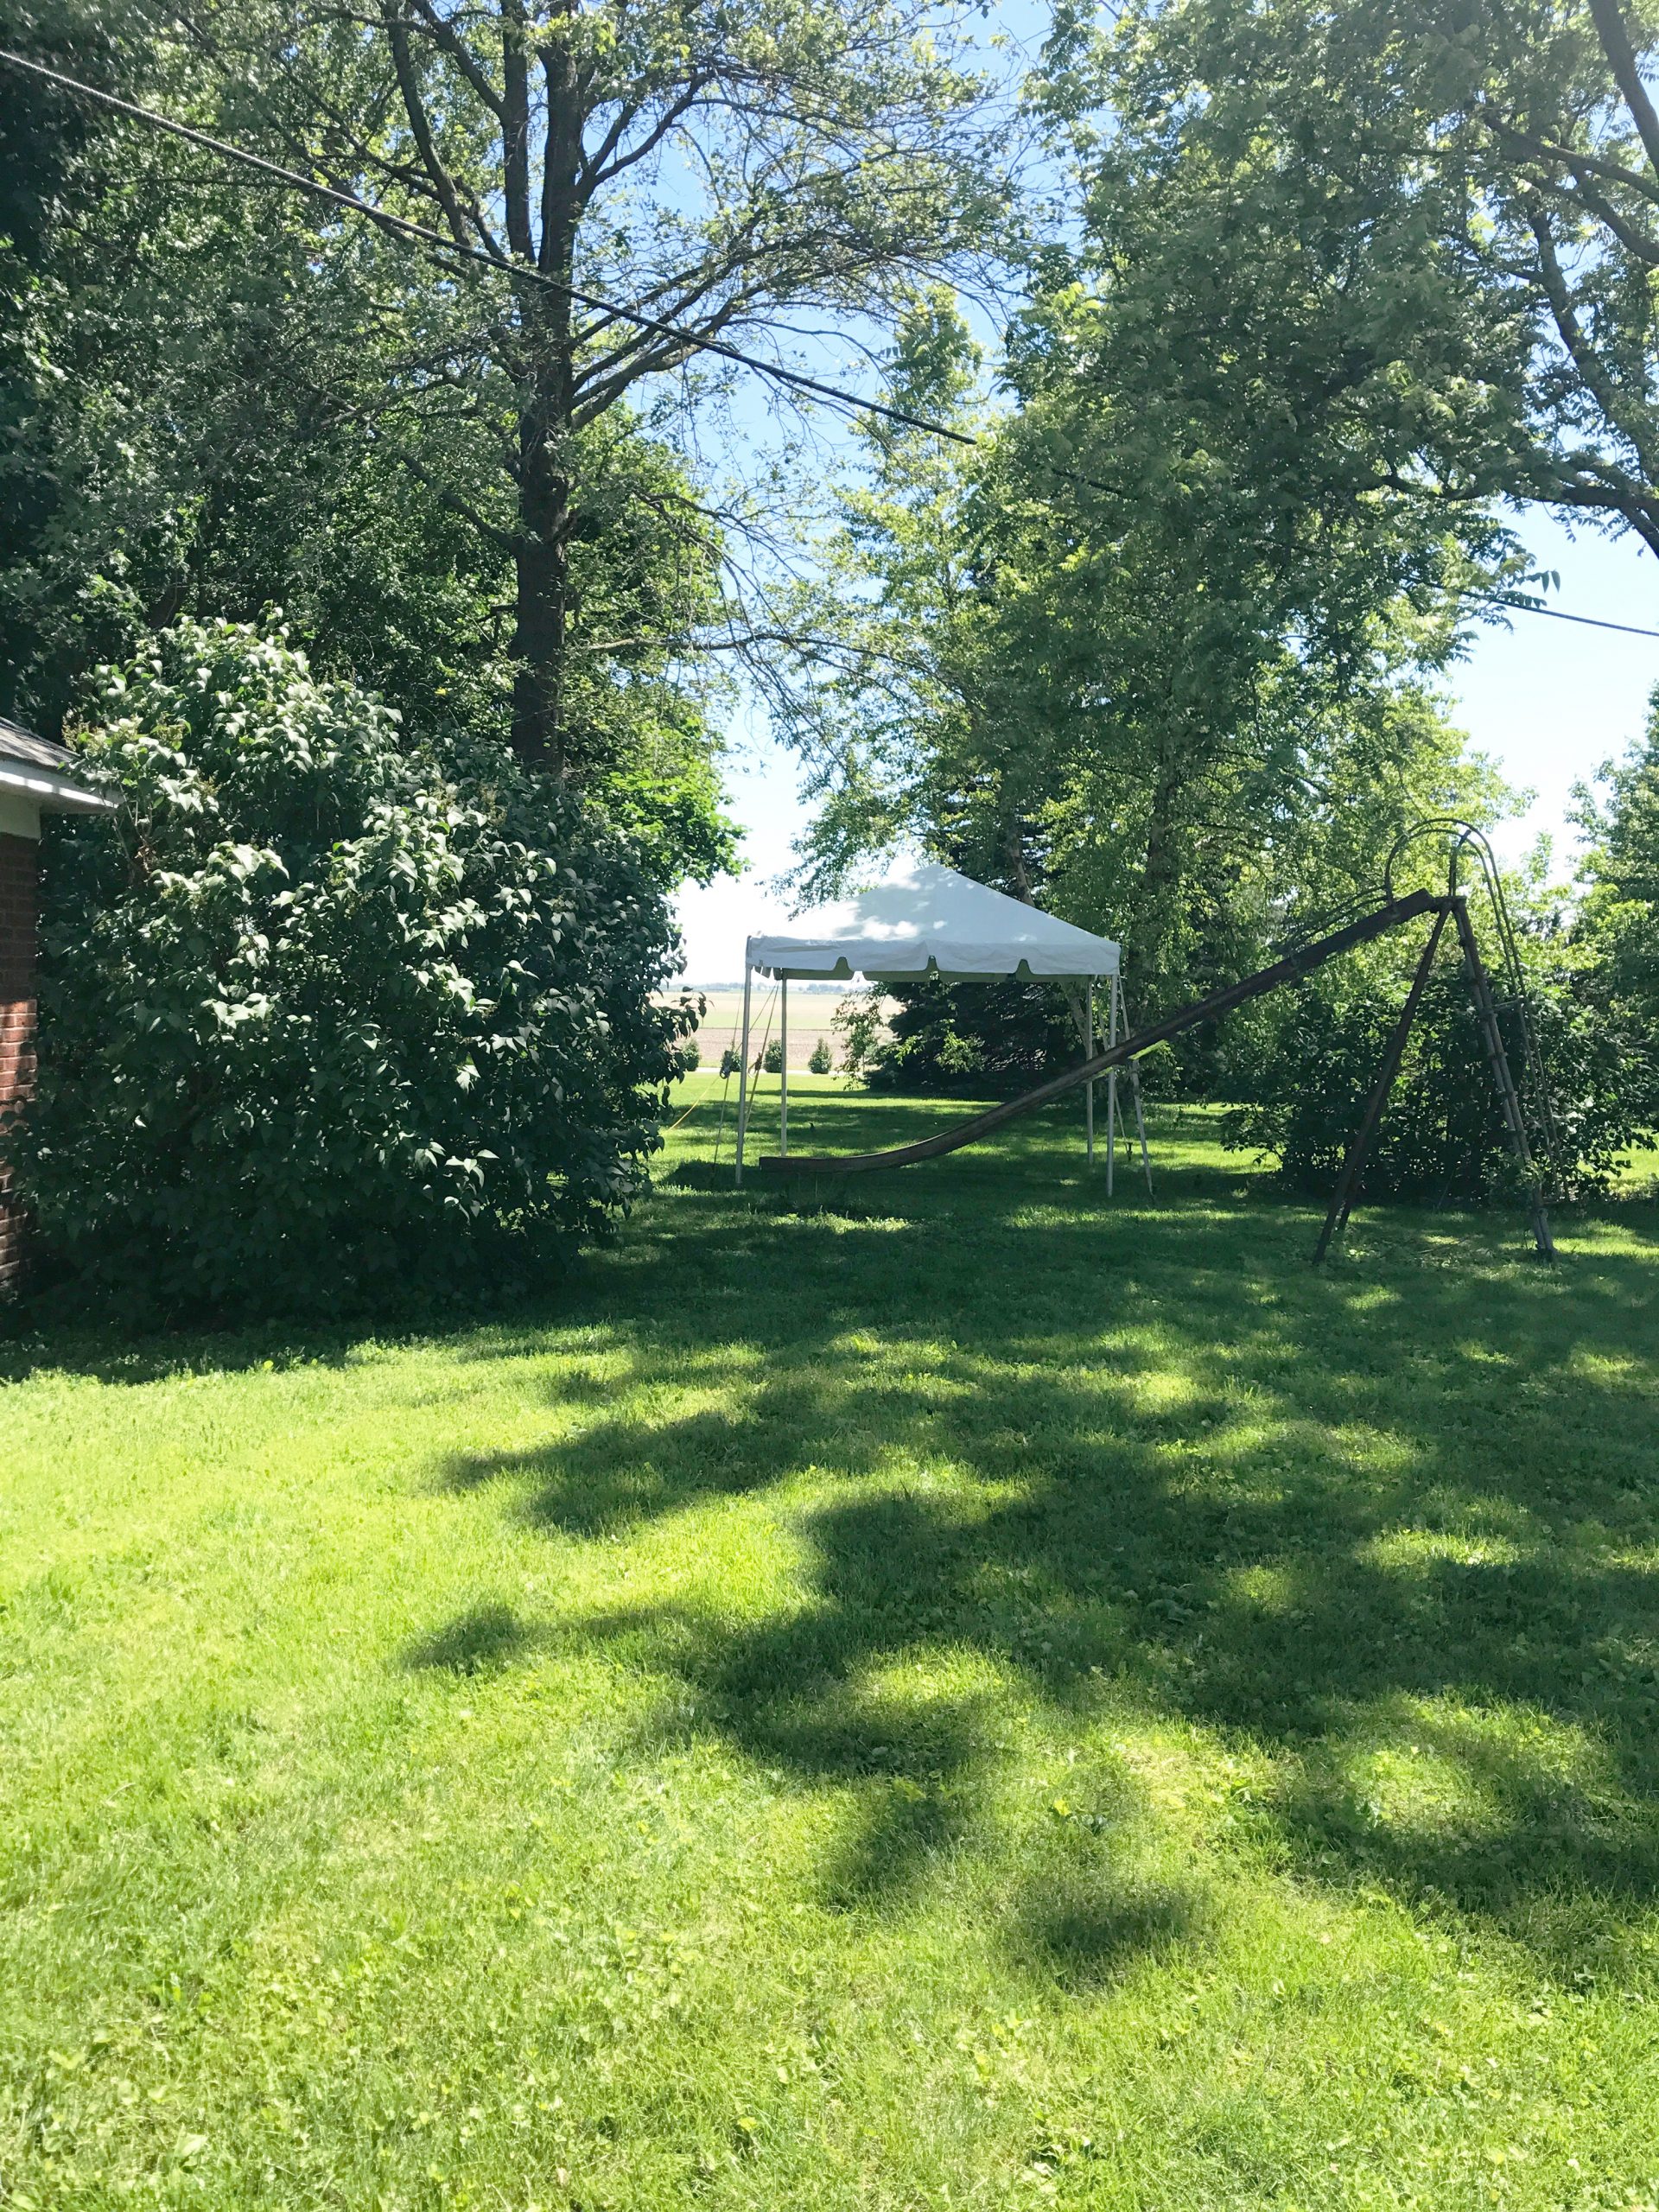 10' x 10' frame tents setup at an outdoor wedding in Iowa